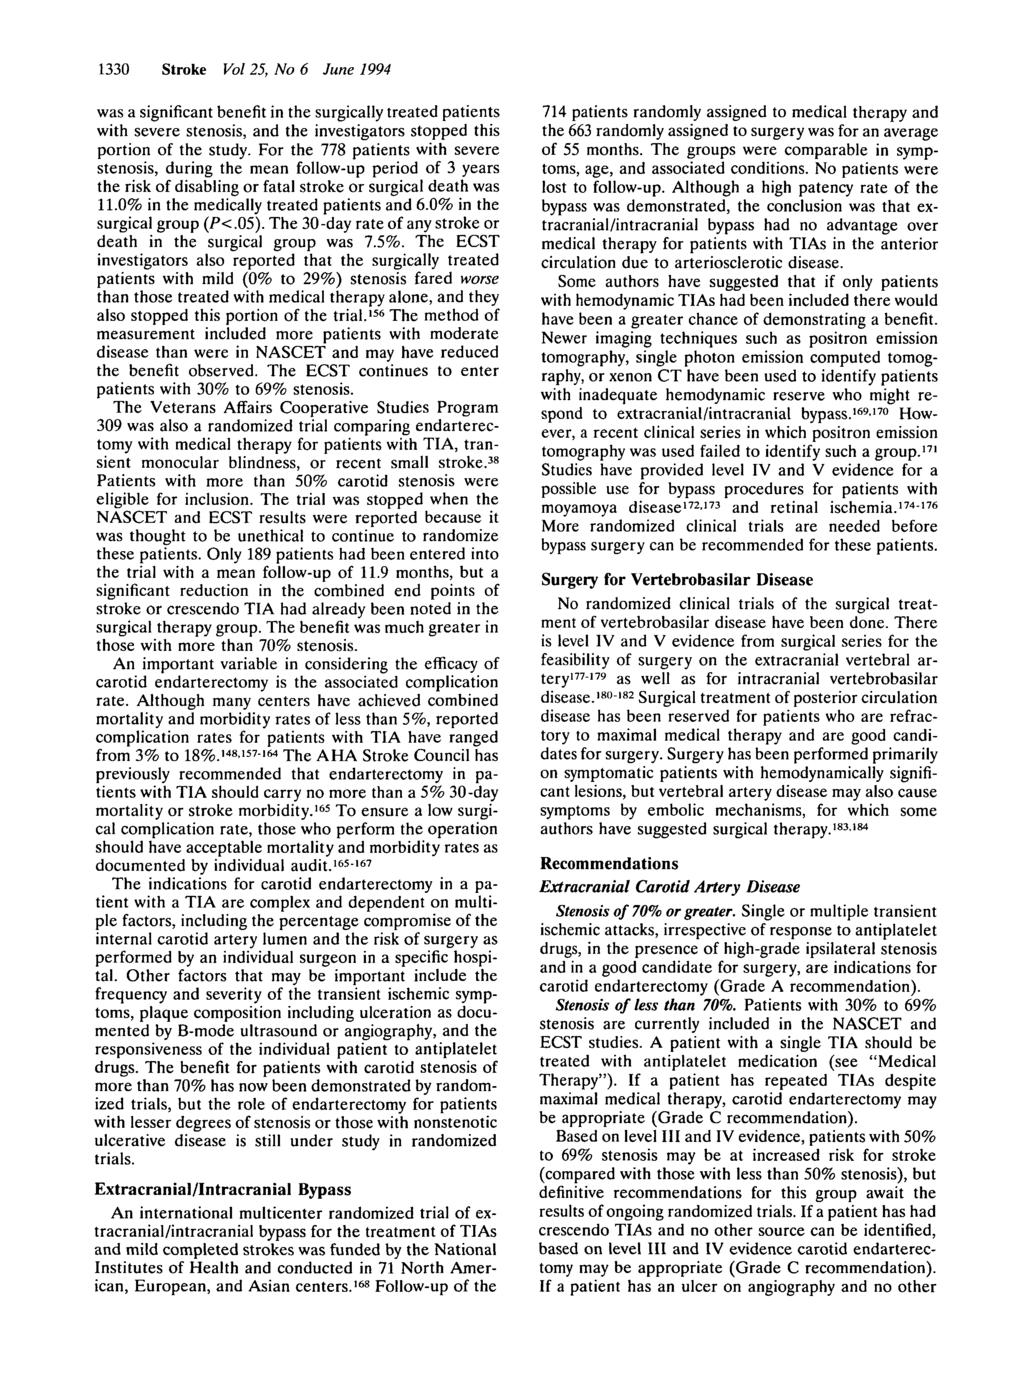 1330 Stroke Vol 25, No 6 June 1994 was a significant benefit in the surgically treated patients with severe stenosis, and the investigators stopped this portion of the study.